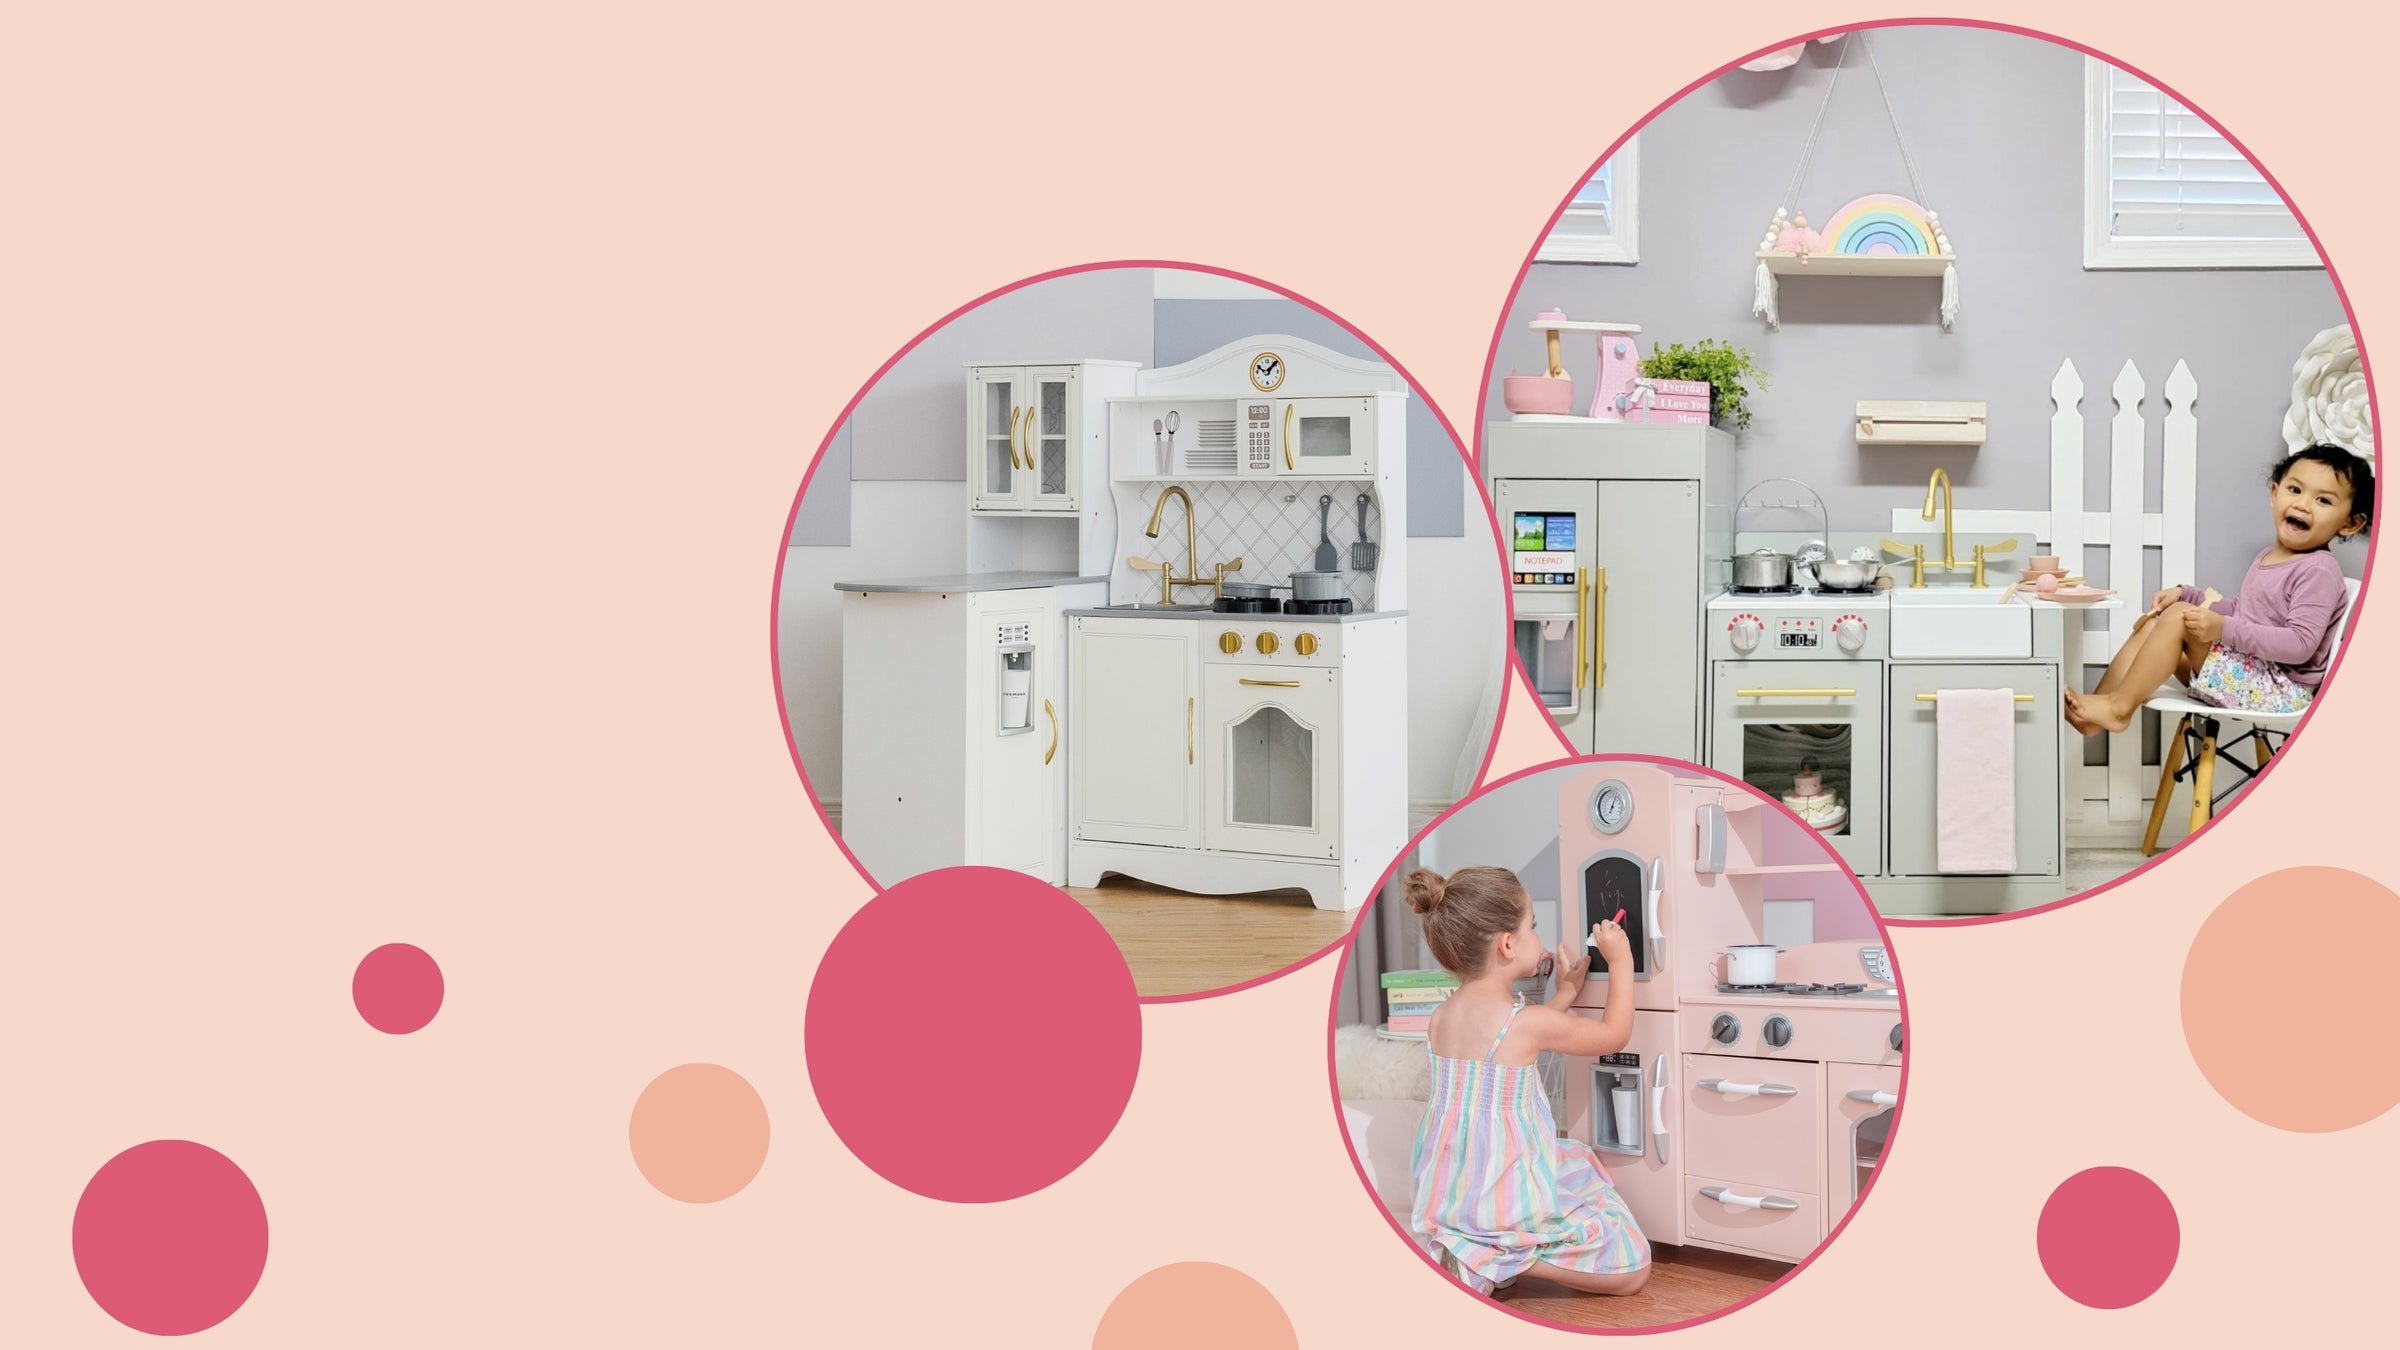 Three circular photos featuring a white and gold play kitchen, a little girl playing with a retro pink play kitchen, and a little girl sitting next to her light gray play kitchen.